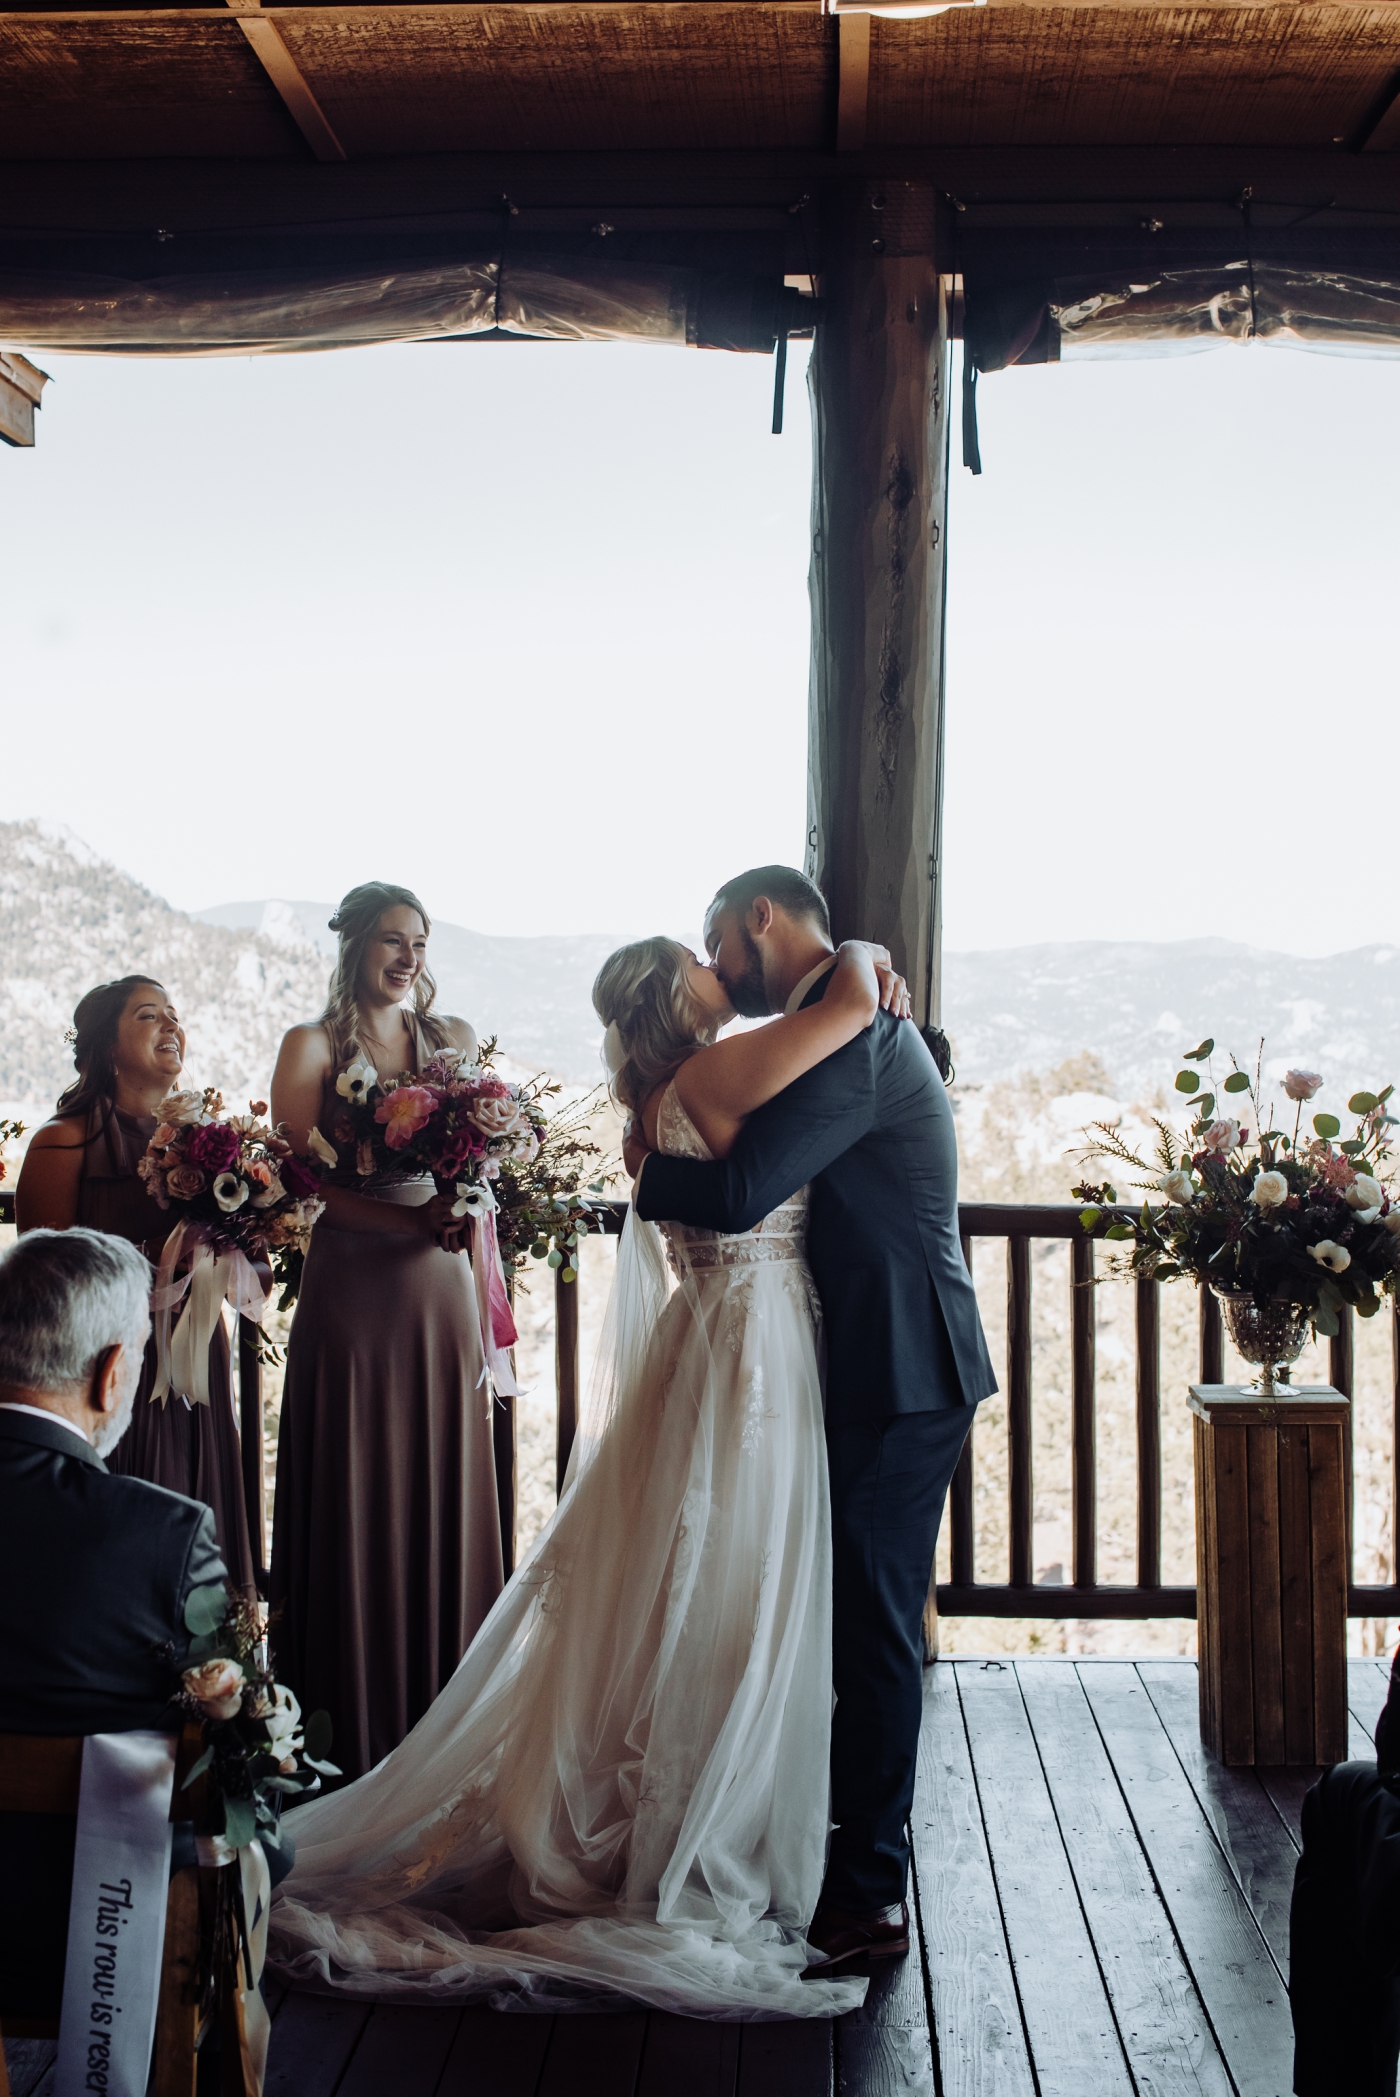 Wedding ceremony at the patio deck of Tahraa Mountain Lodge